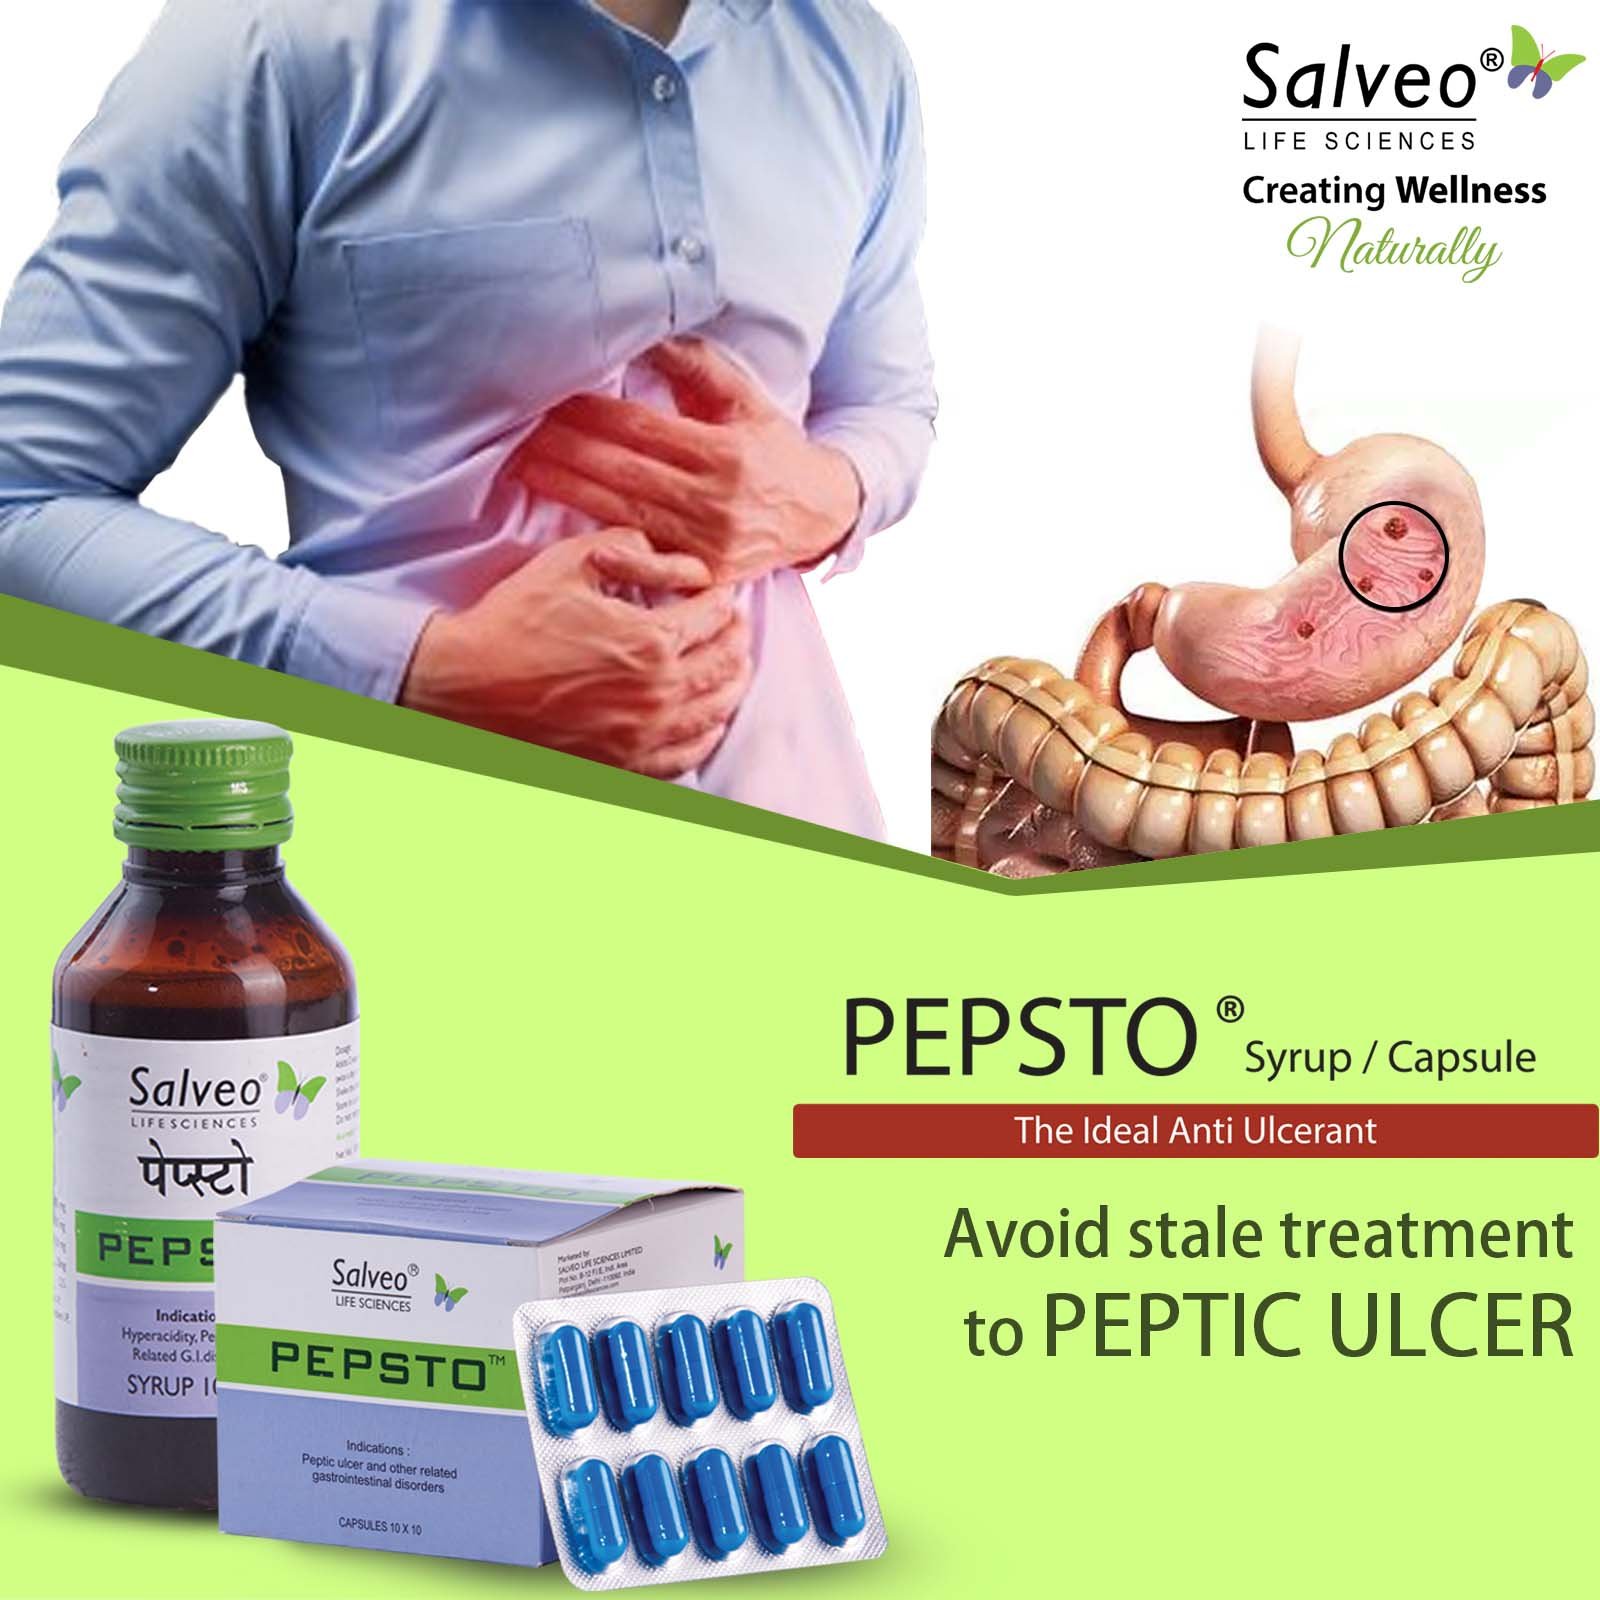 Avoid stale treatment to Peptic Ulcer and use Pepsto for ...